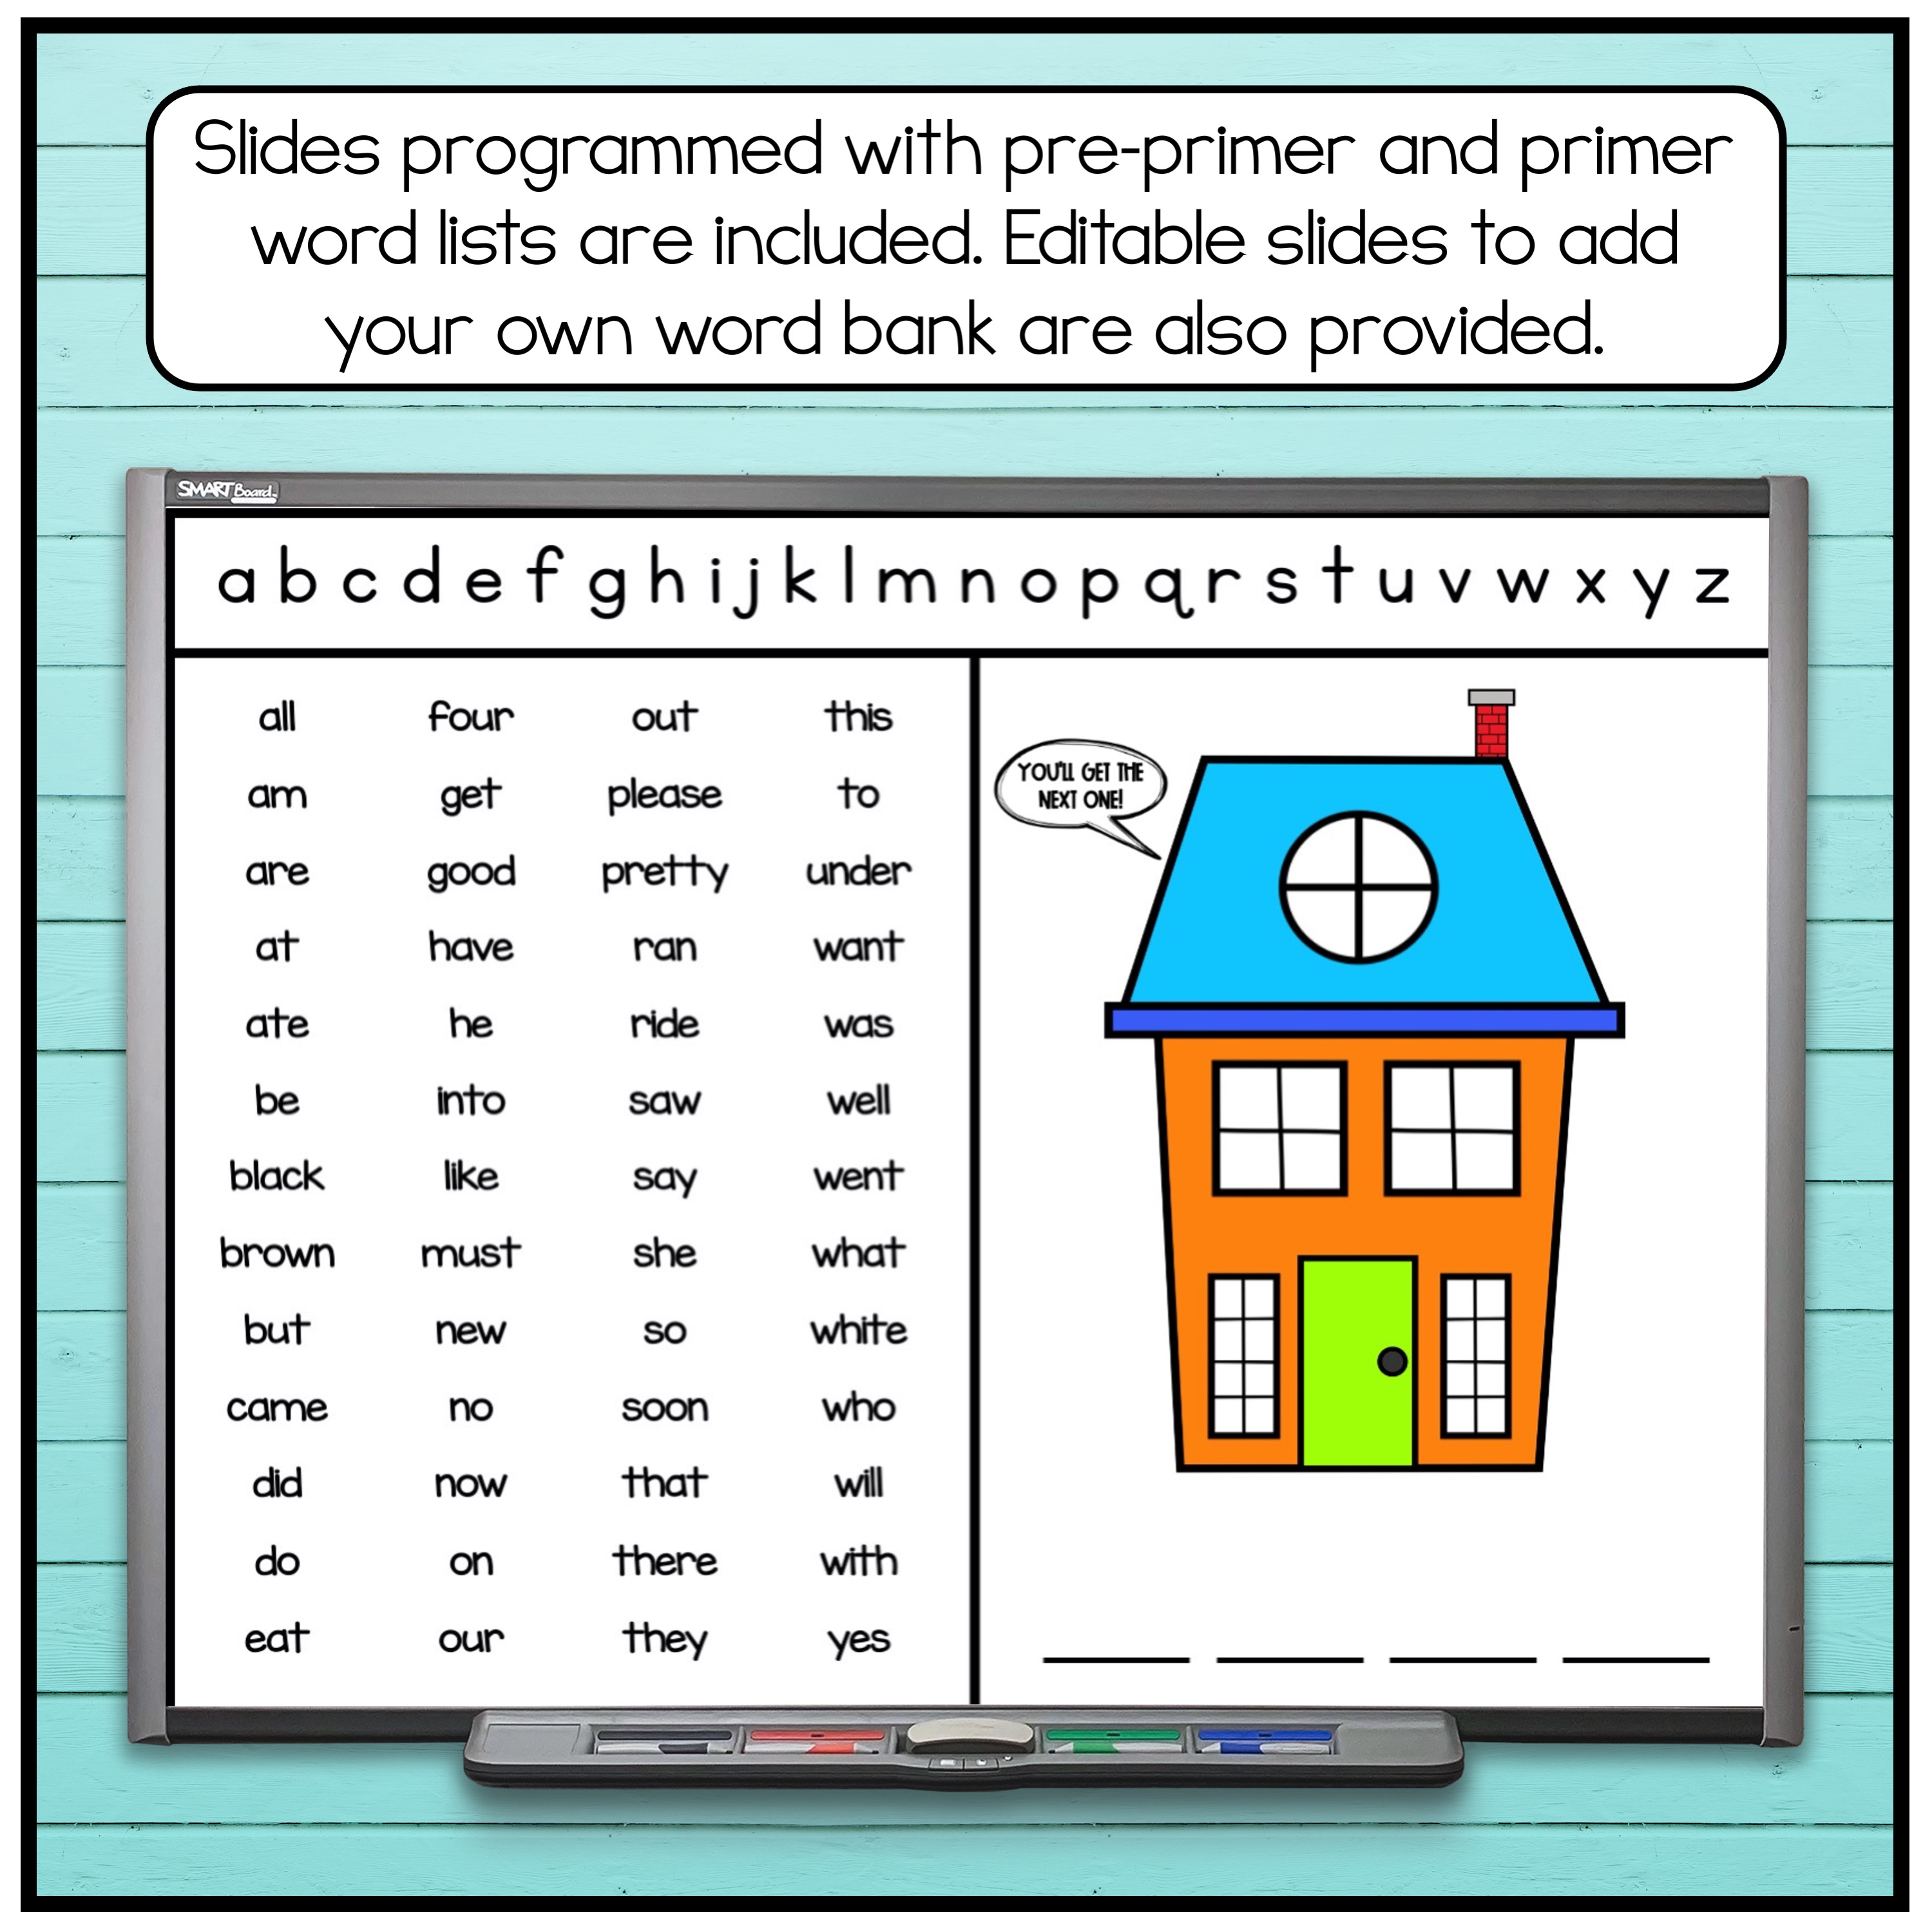 Sight Word Games: Hangman - Sight Words, Reading, Writing, Spelling &  Worksheets